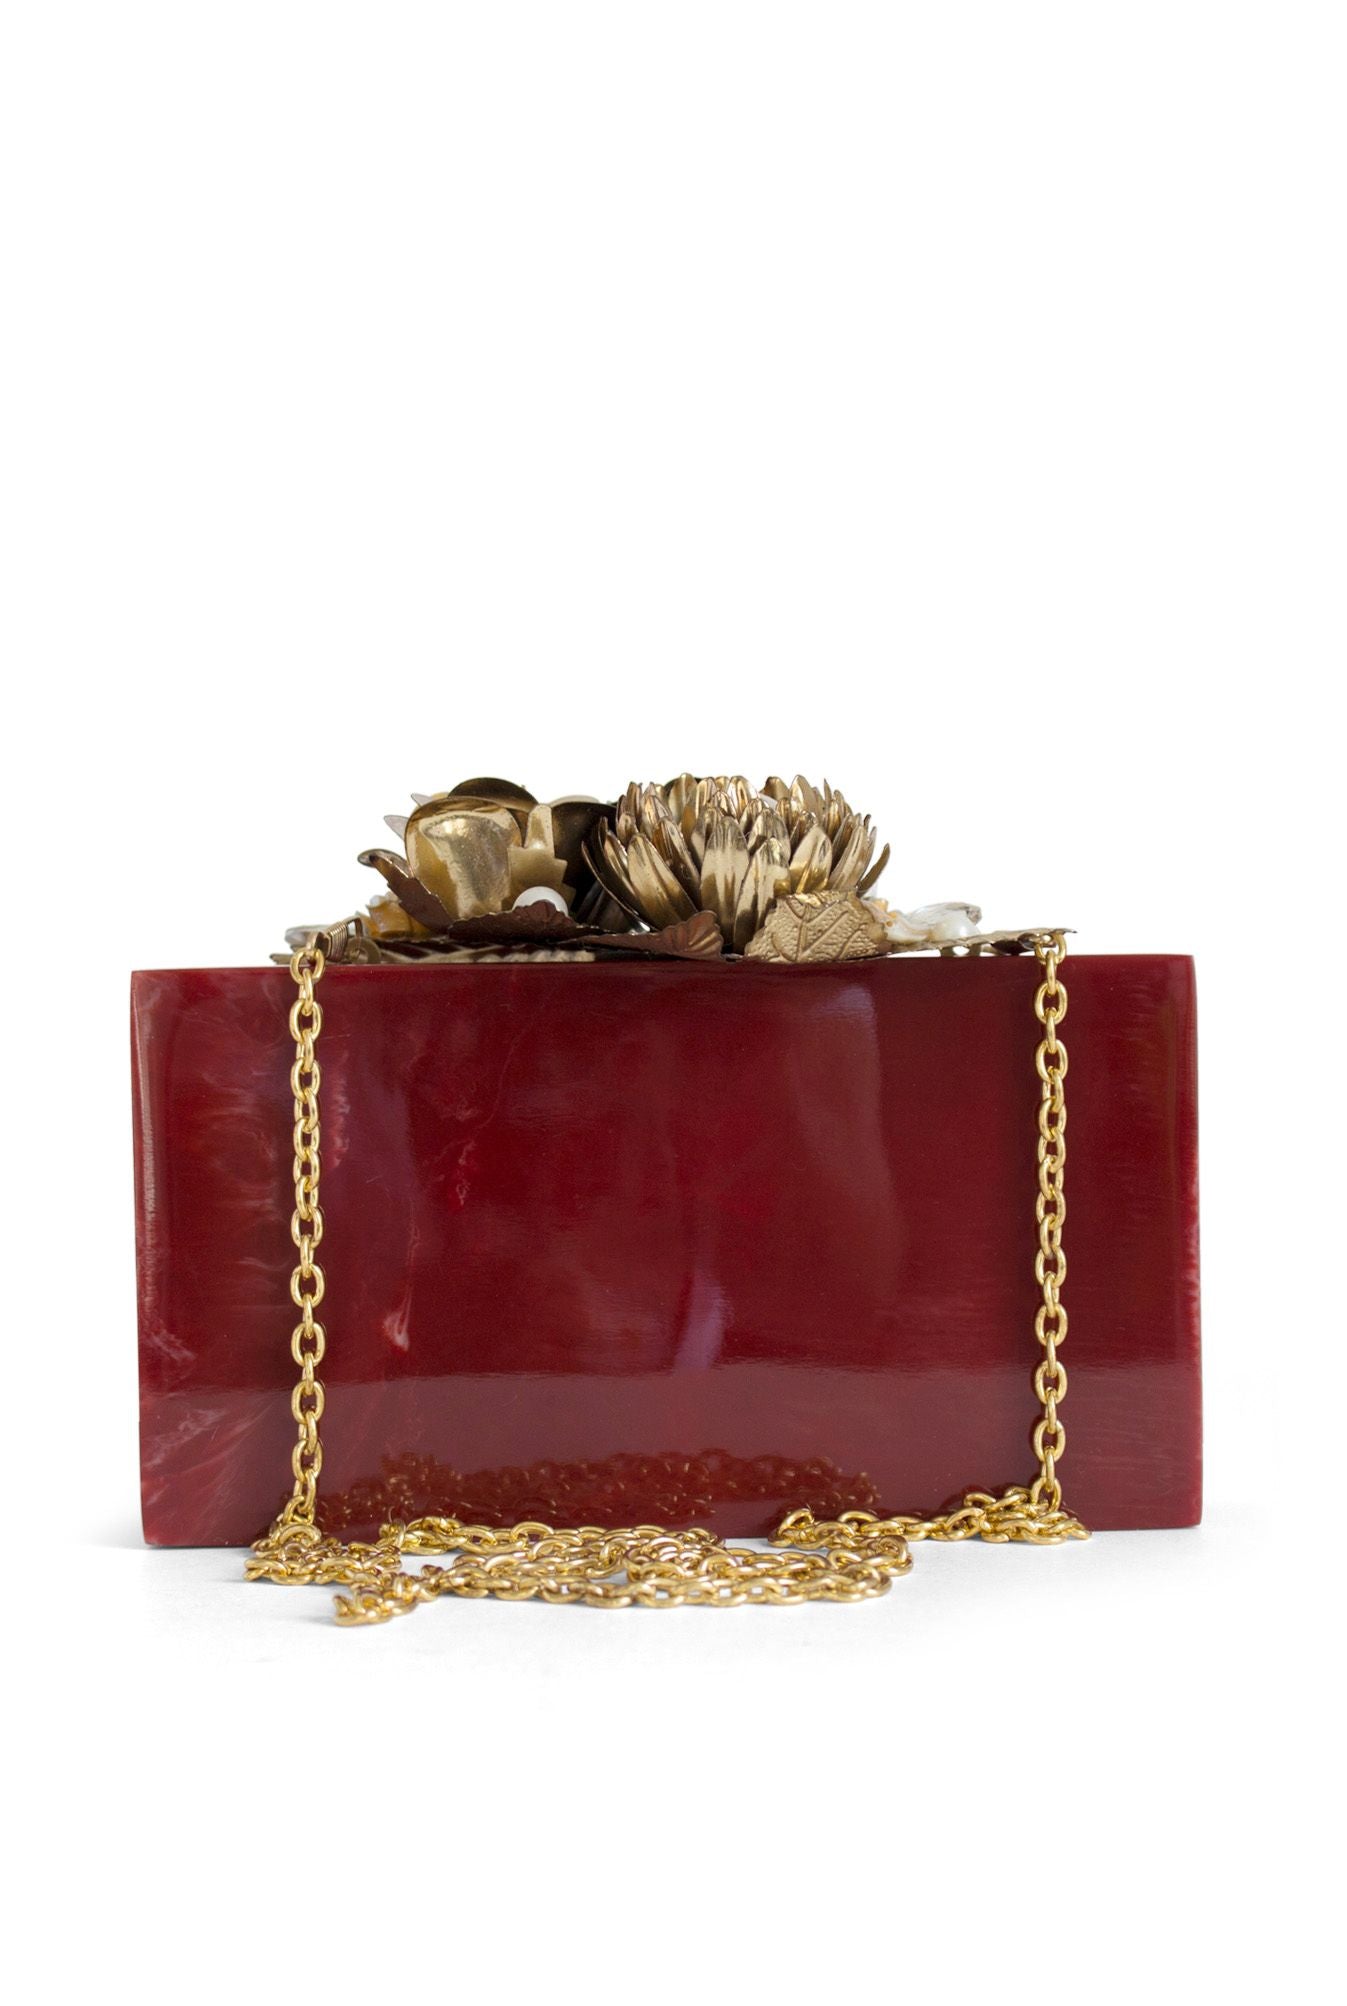 Red and Gold Rose Bag